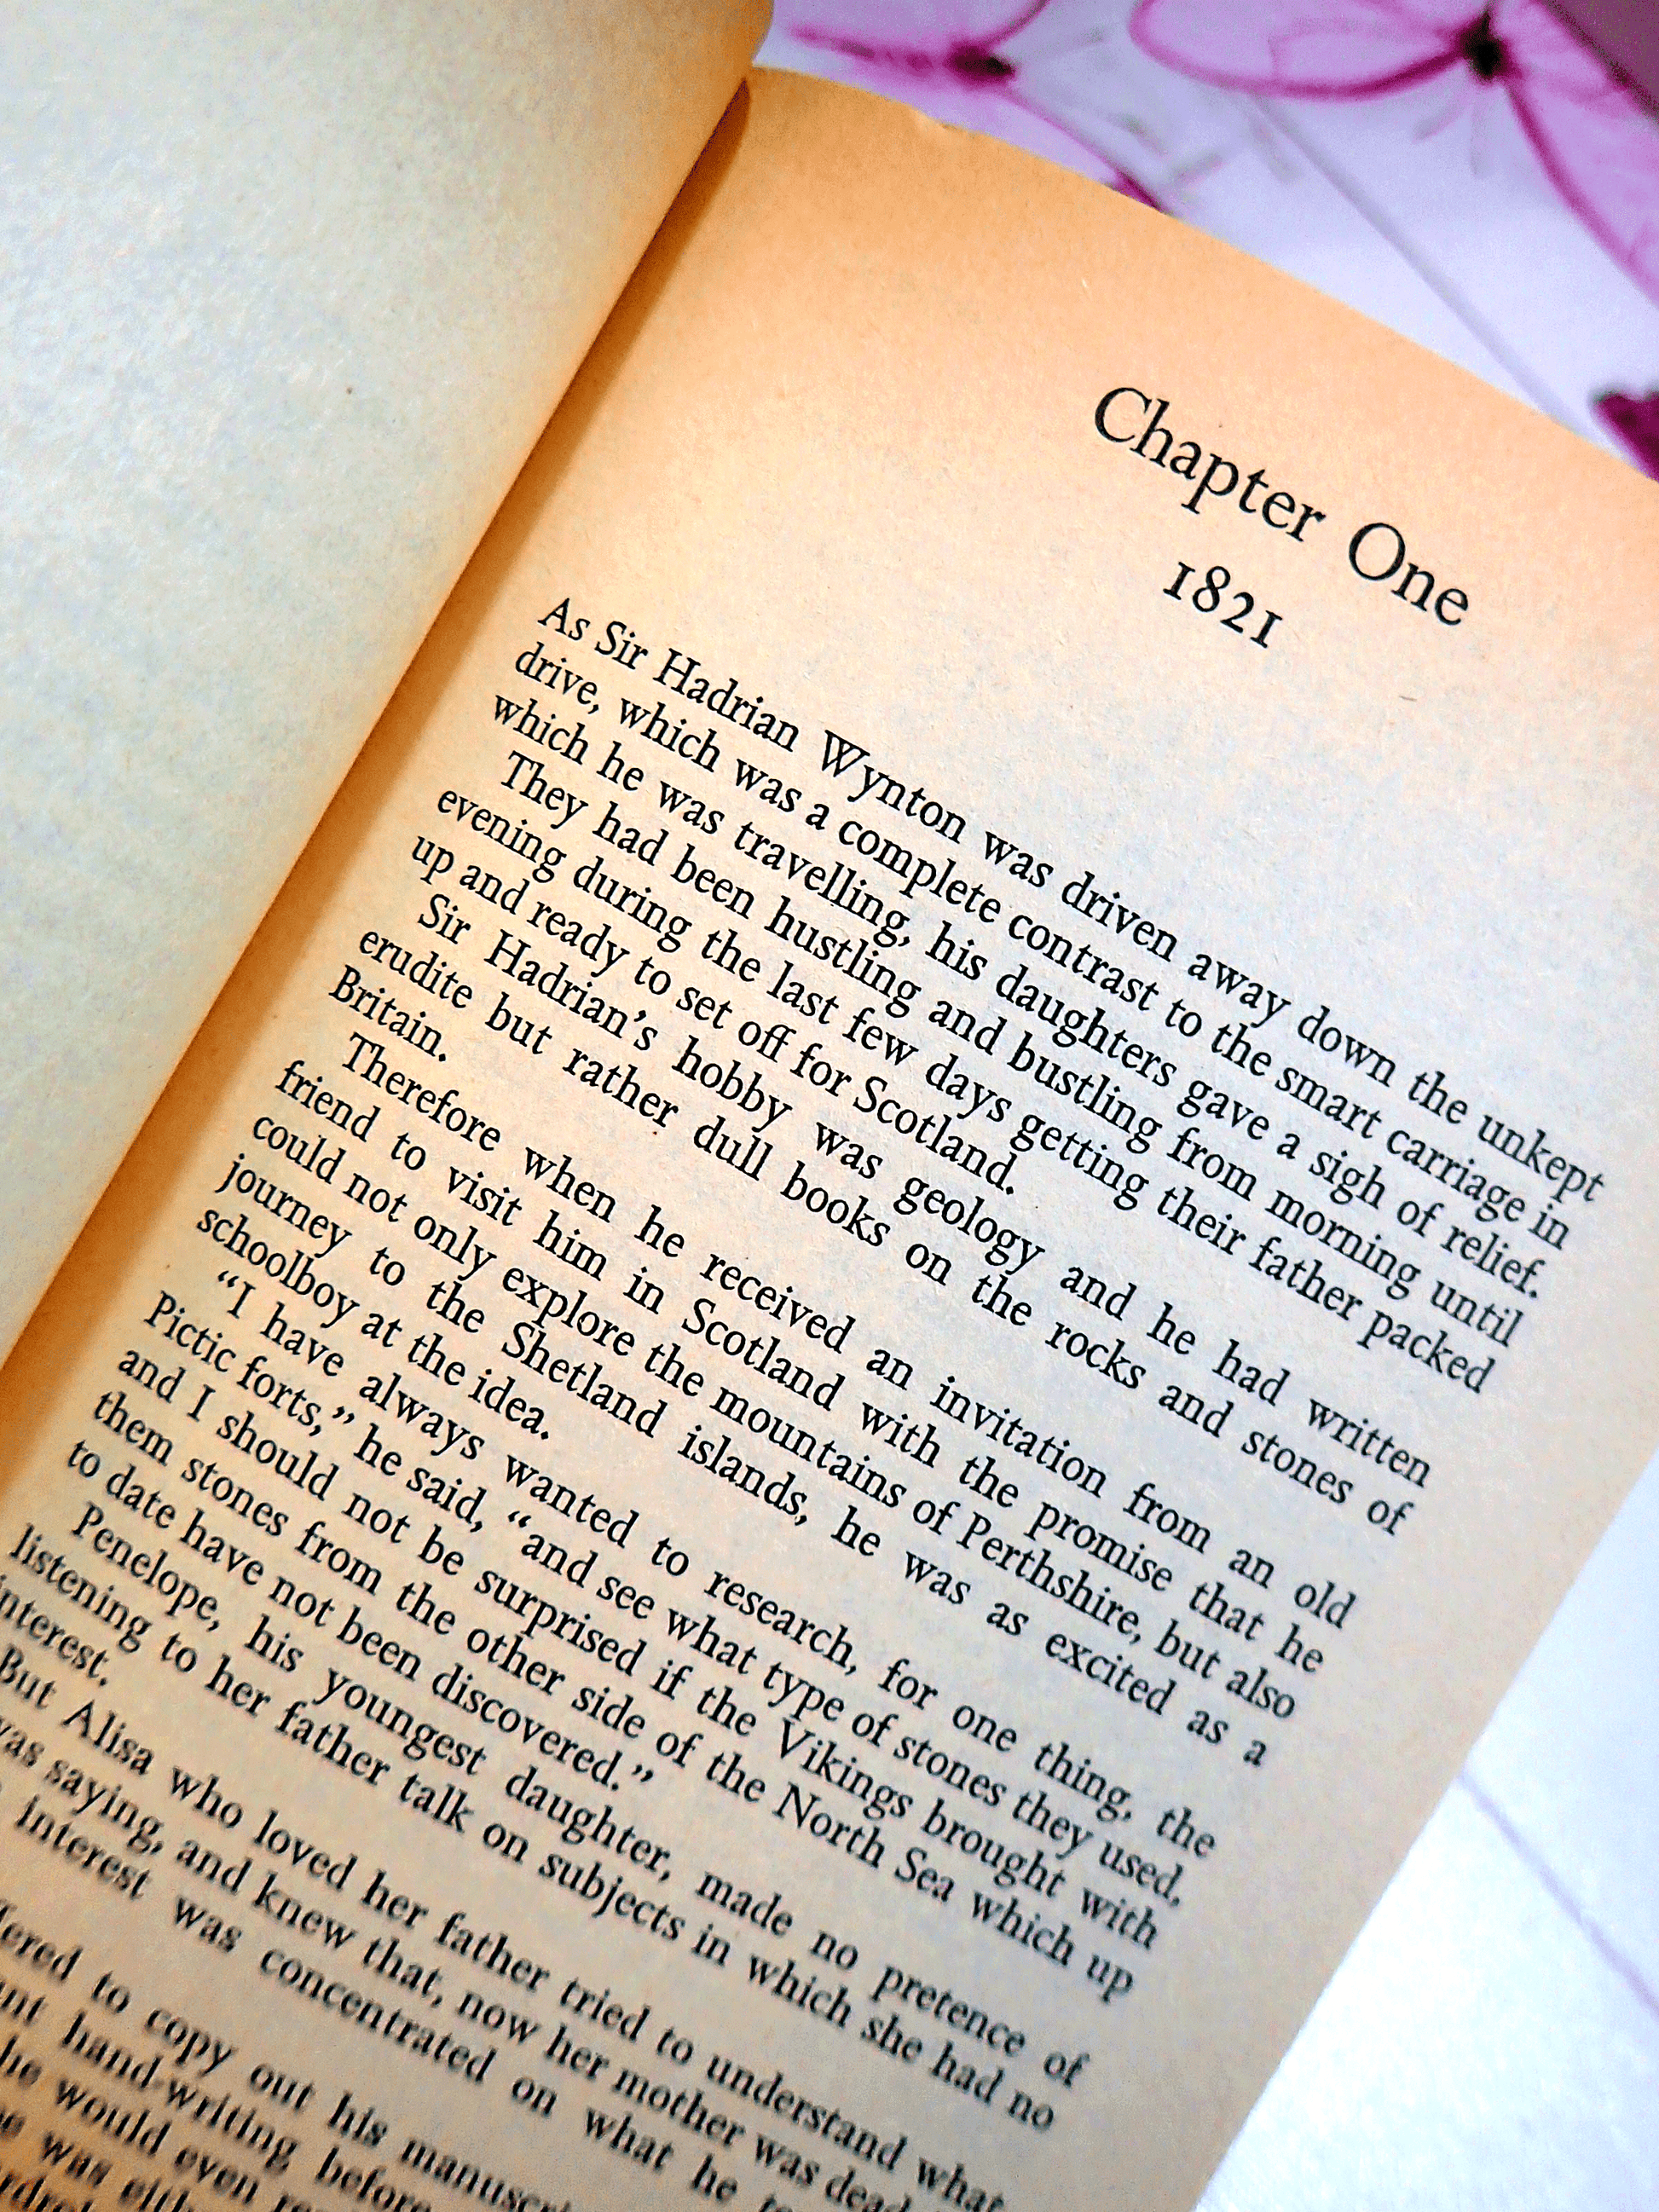 First page of Gift of the Gods Barbara Cartland Pan Paperback showing text: "Chapter One, 1821. As Sir Hadrian Wyton..."